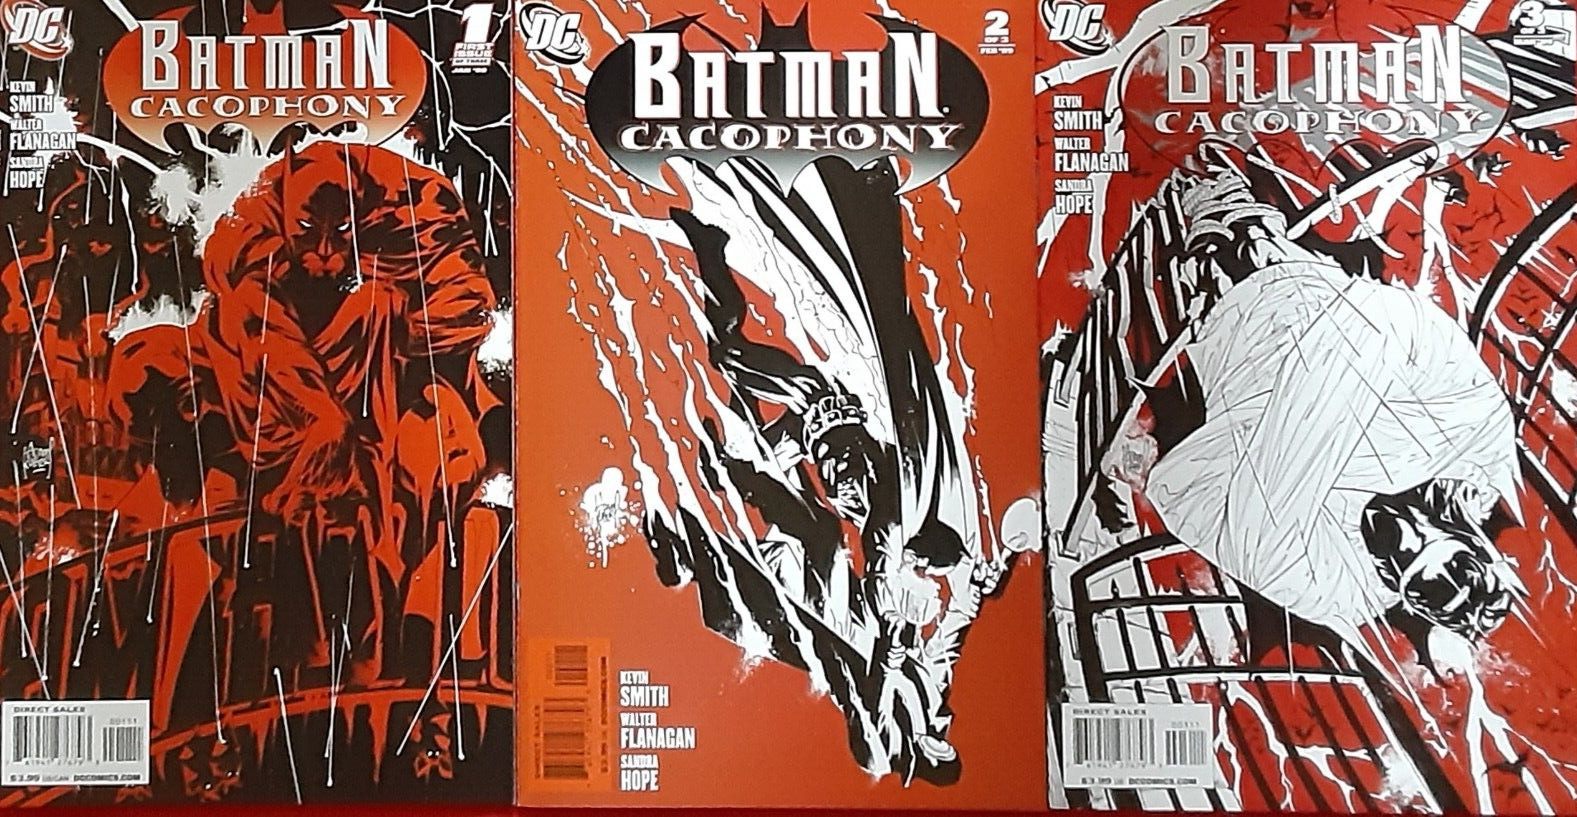 BATMAN : CACOPHONY  COMPLETE SET #1-3  KEVIN SMITH  DC   2009  NICE